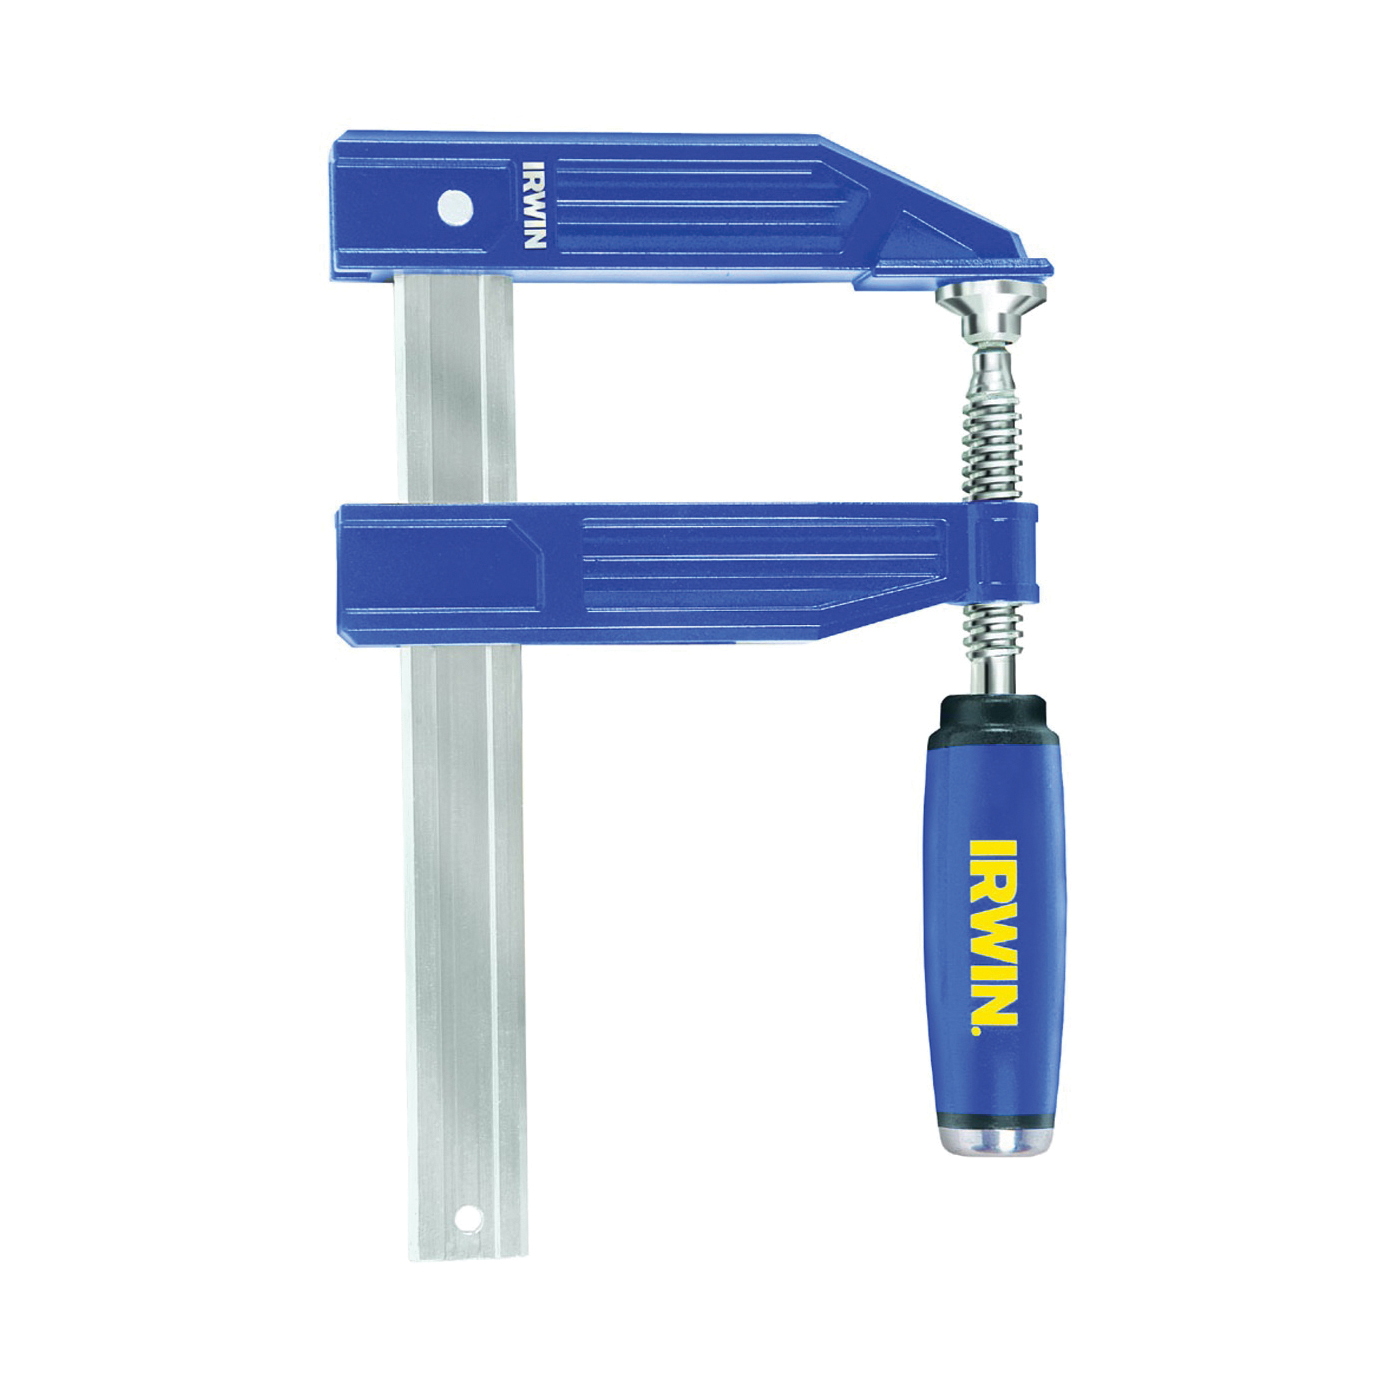 QUICK-GRIP 223230 Heavy-Duty Bar Clamp, 30 in Max Opening Size, 4-7/8 in D Throat